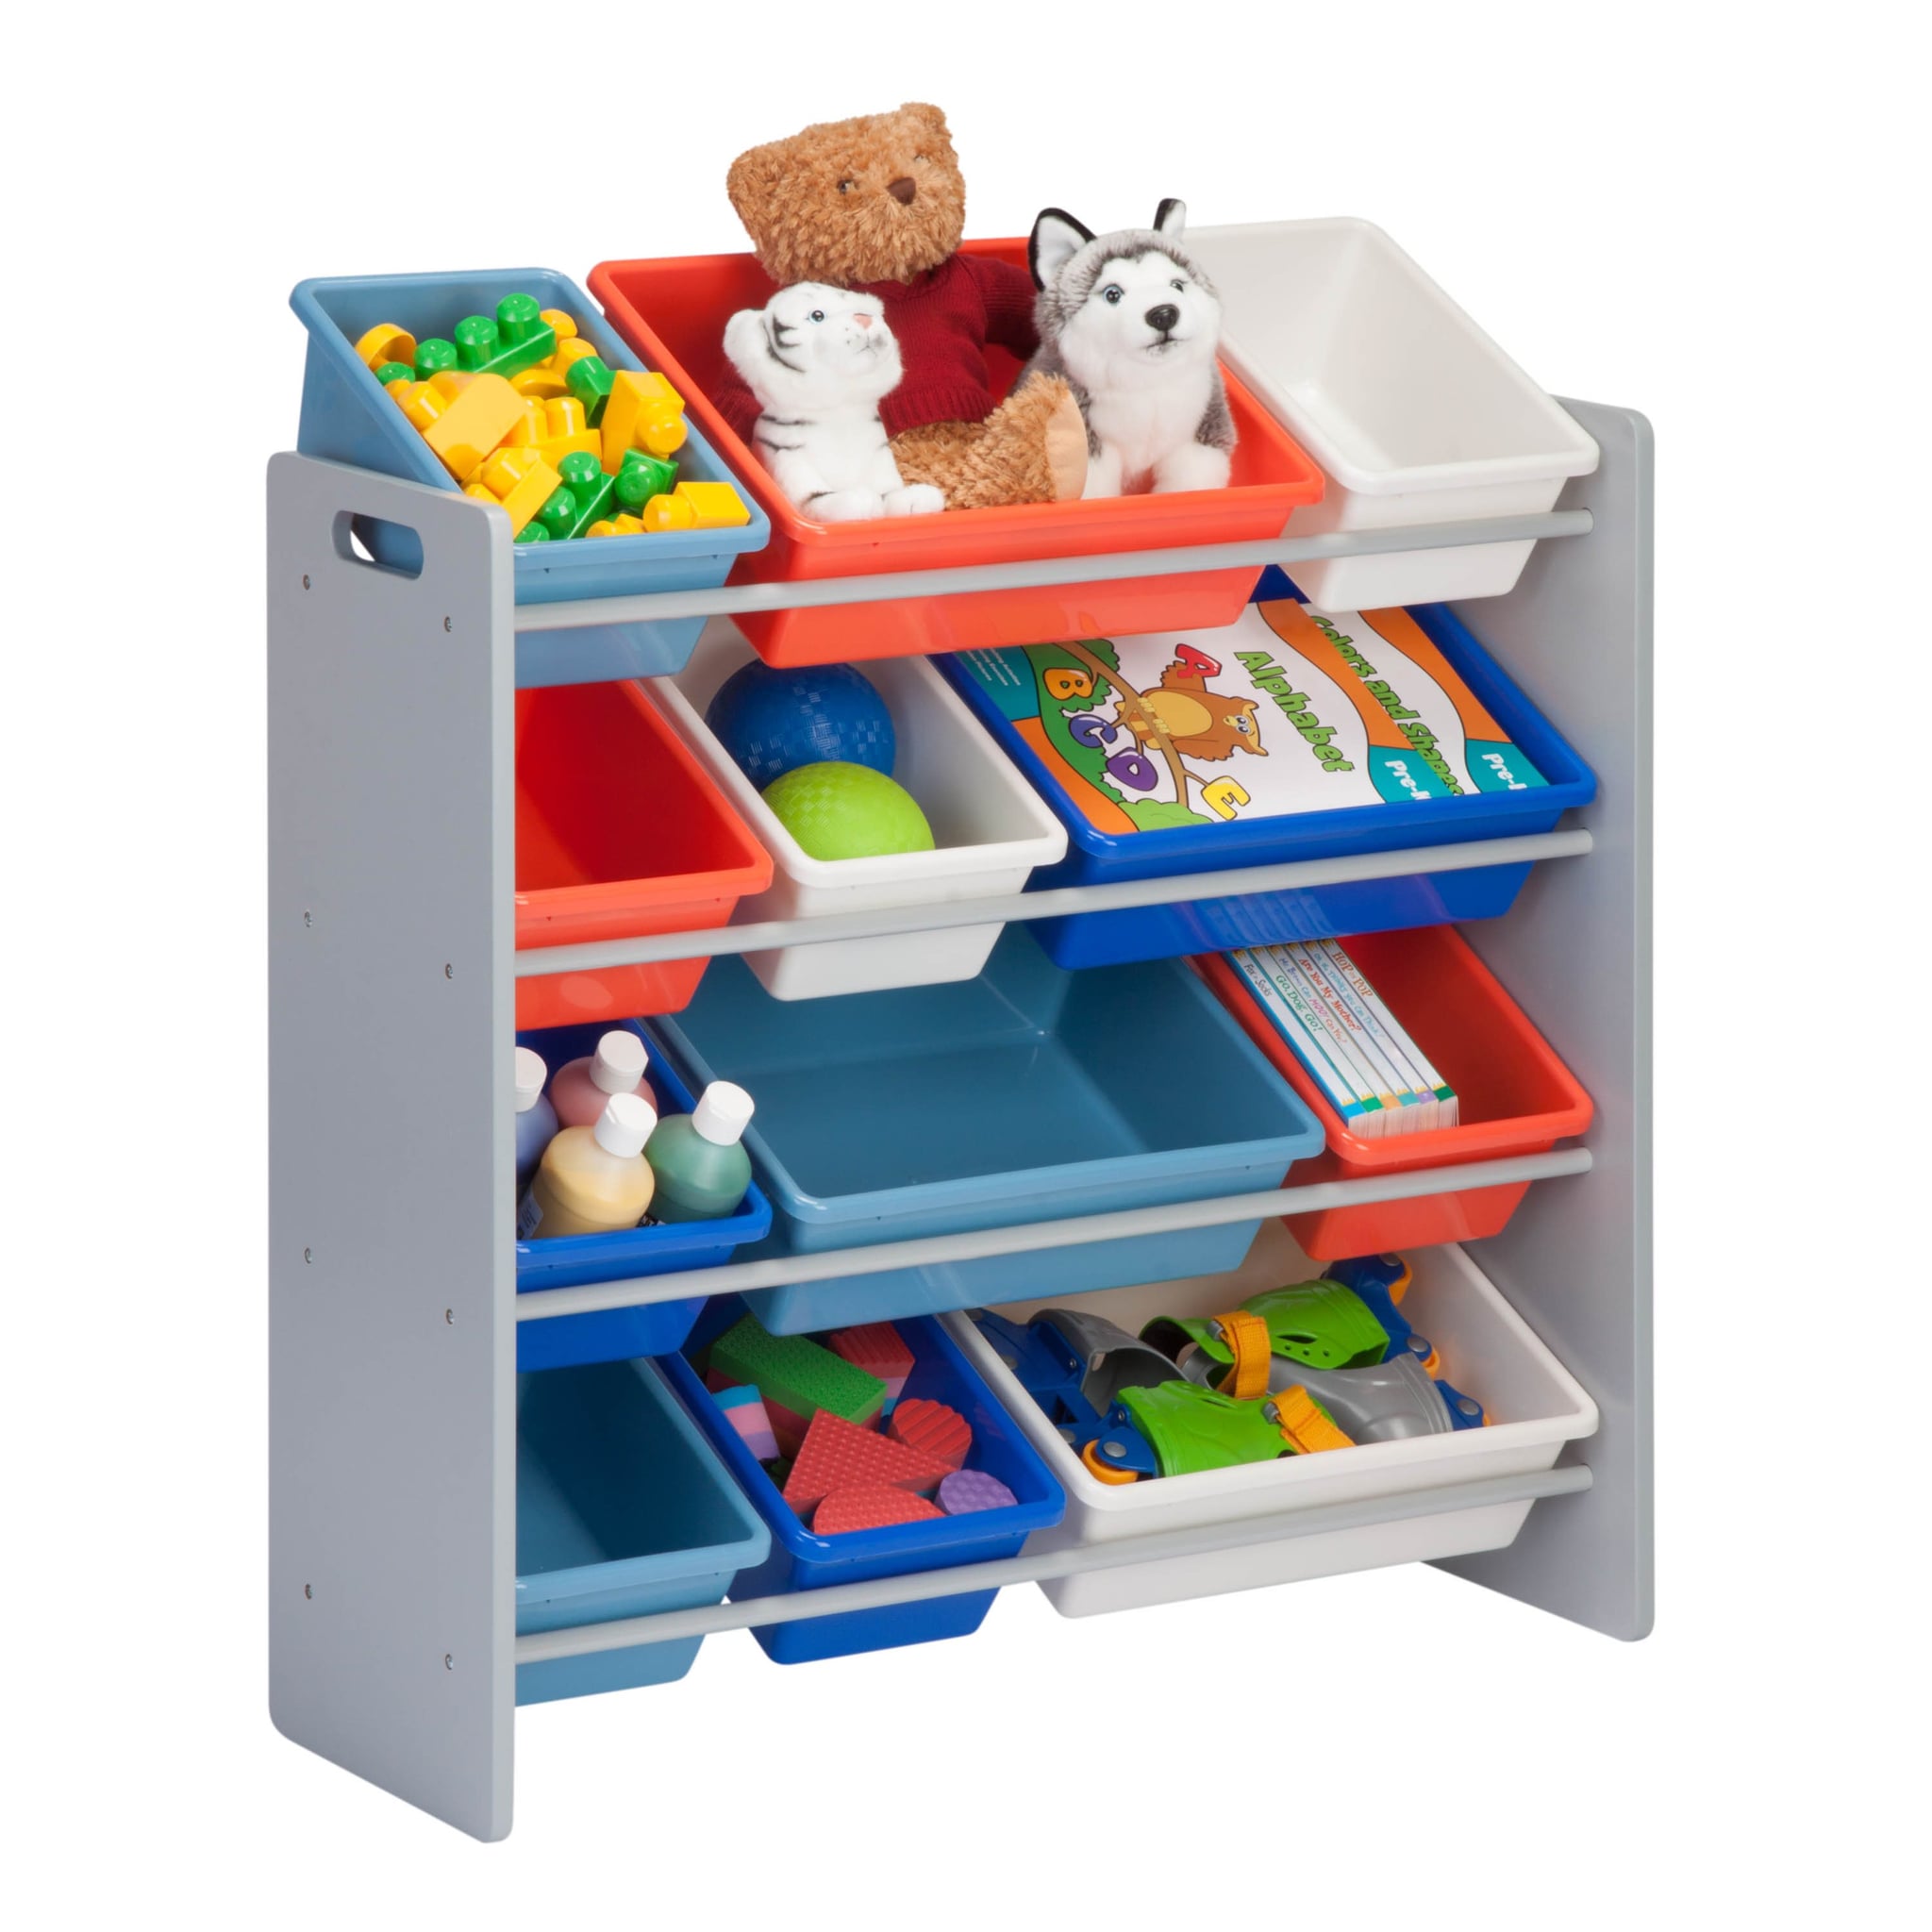 Koala Ideal for Toy Storage VictoryMeet Cube Storage Box with Animal Pictures Kids Storage and as a Organiser Container 